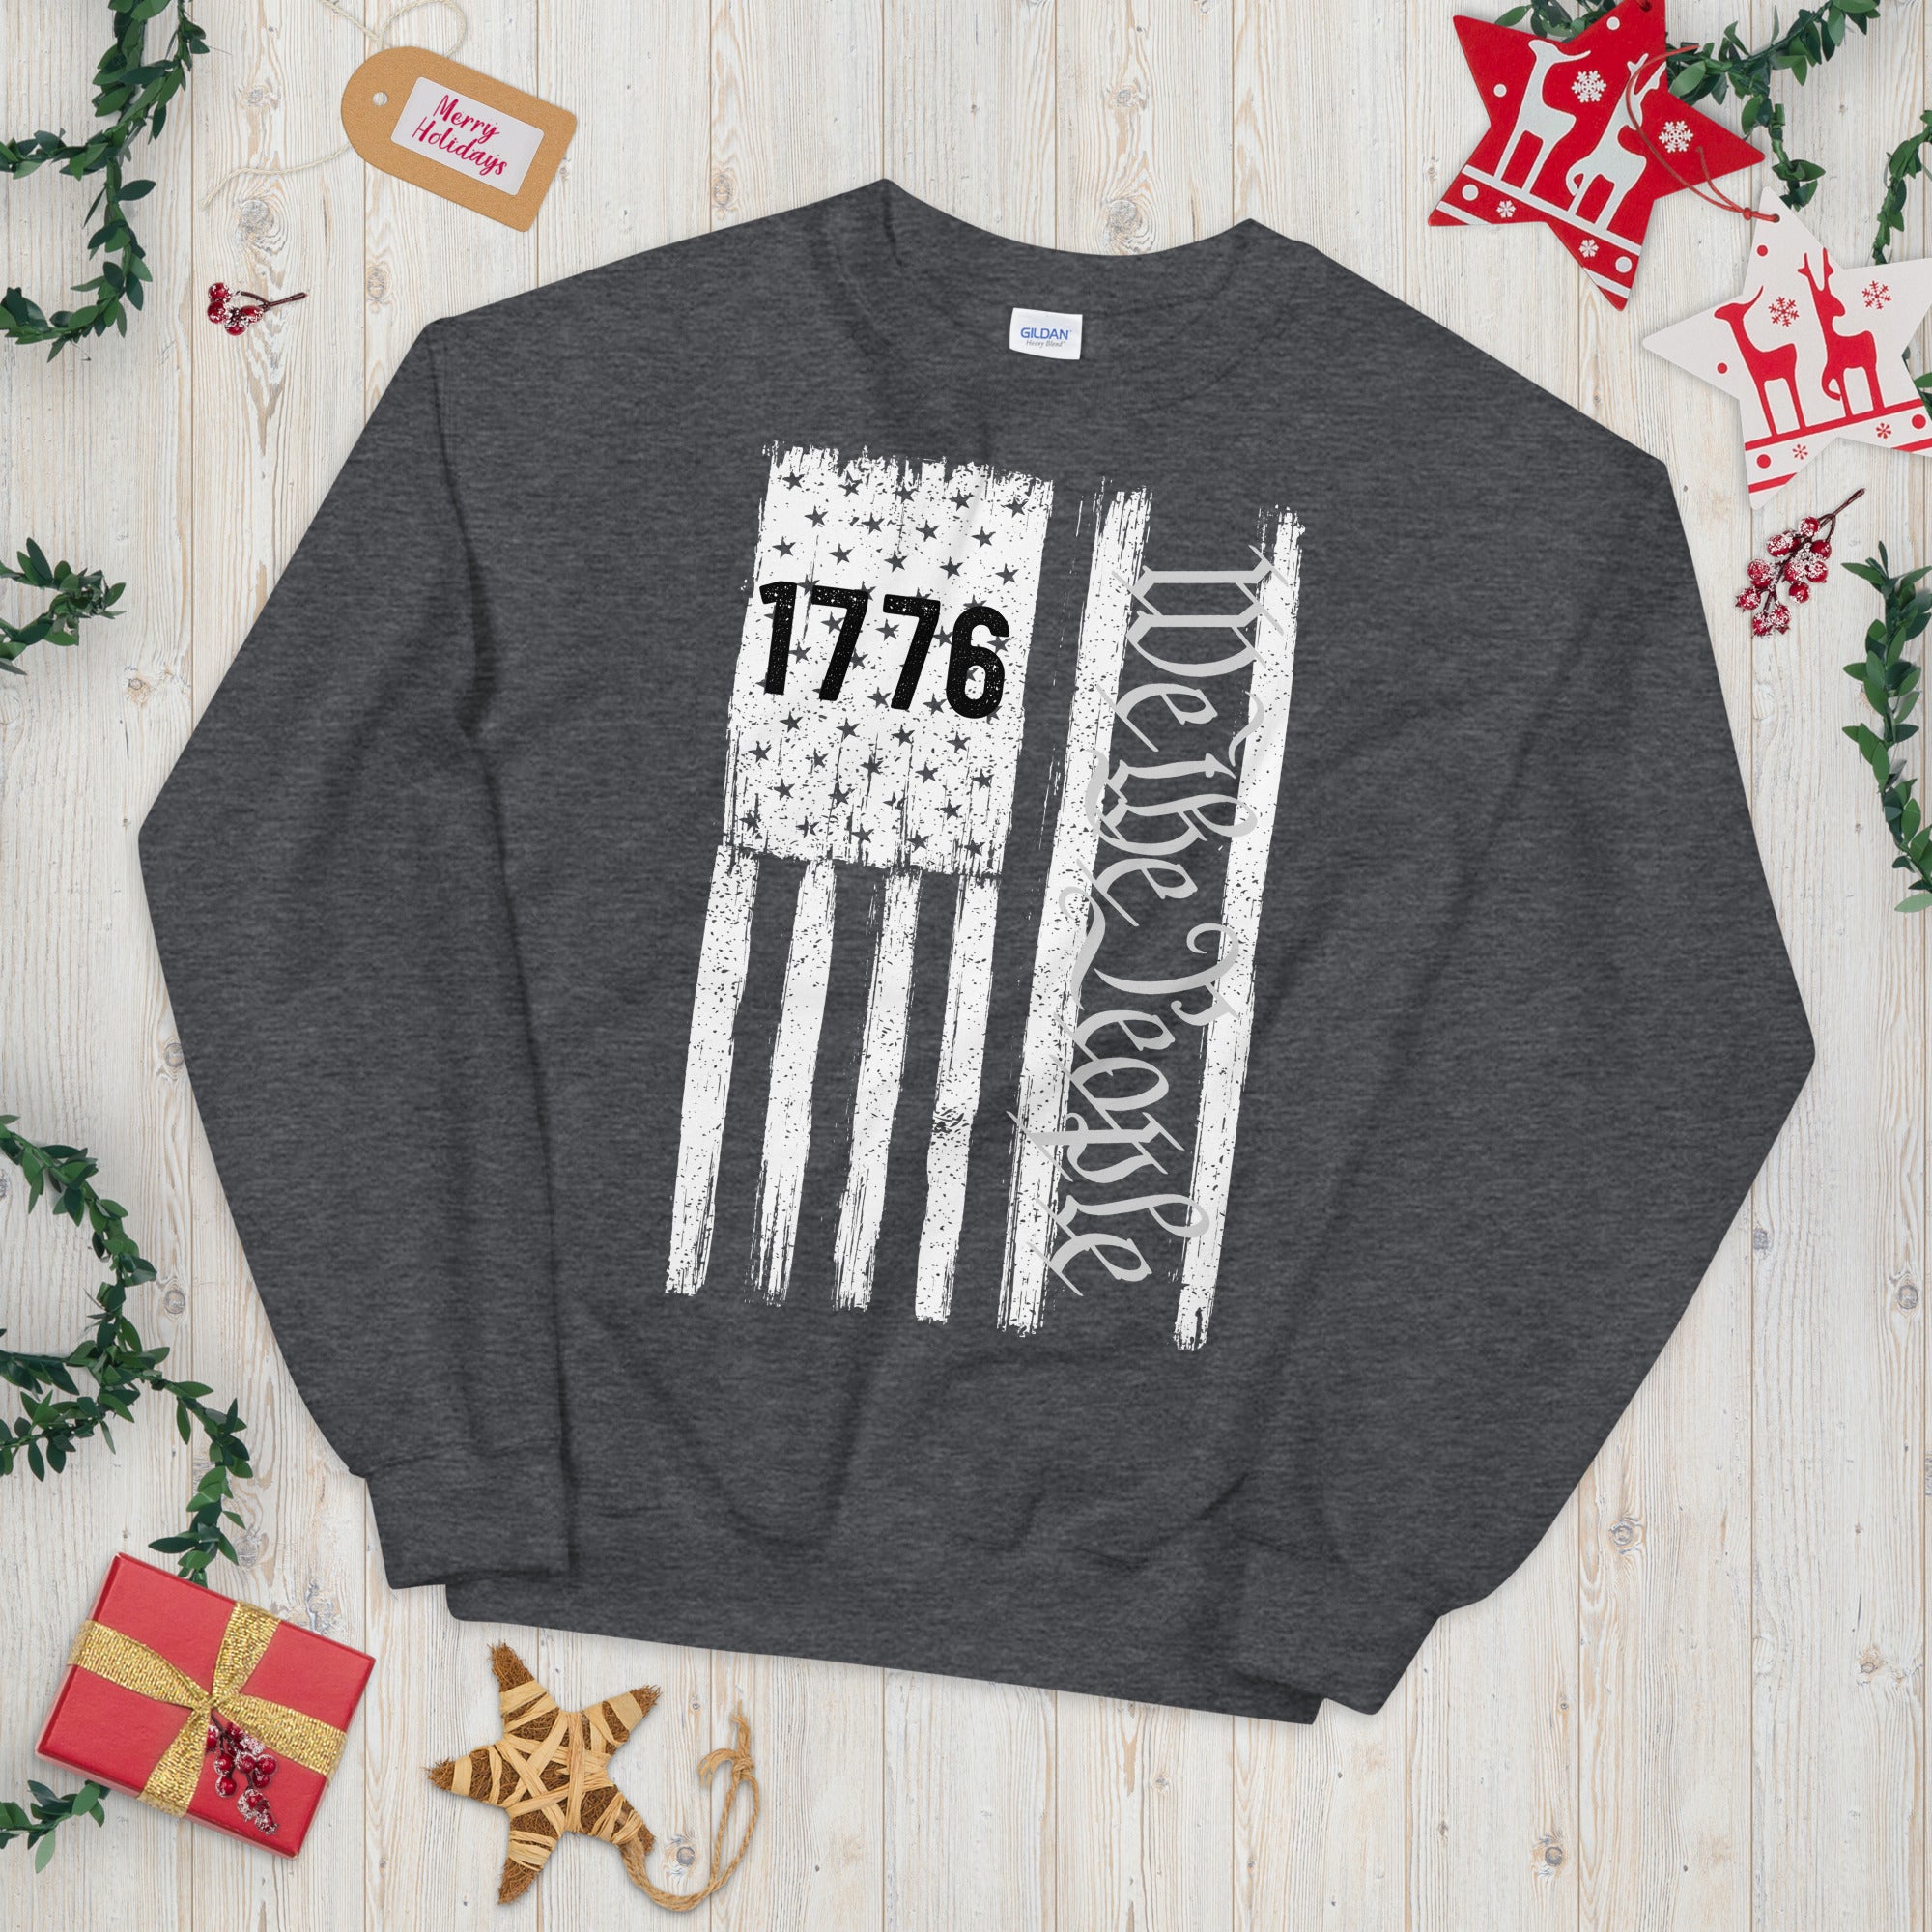 1776 We The People Sweater, Patriotic USA American Flag, Vintage US Flag Shirt, Independence Day, 1776 Sweater, We the people patriotic gift - Madeinsea©